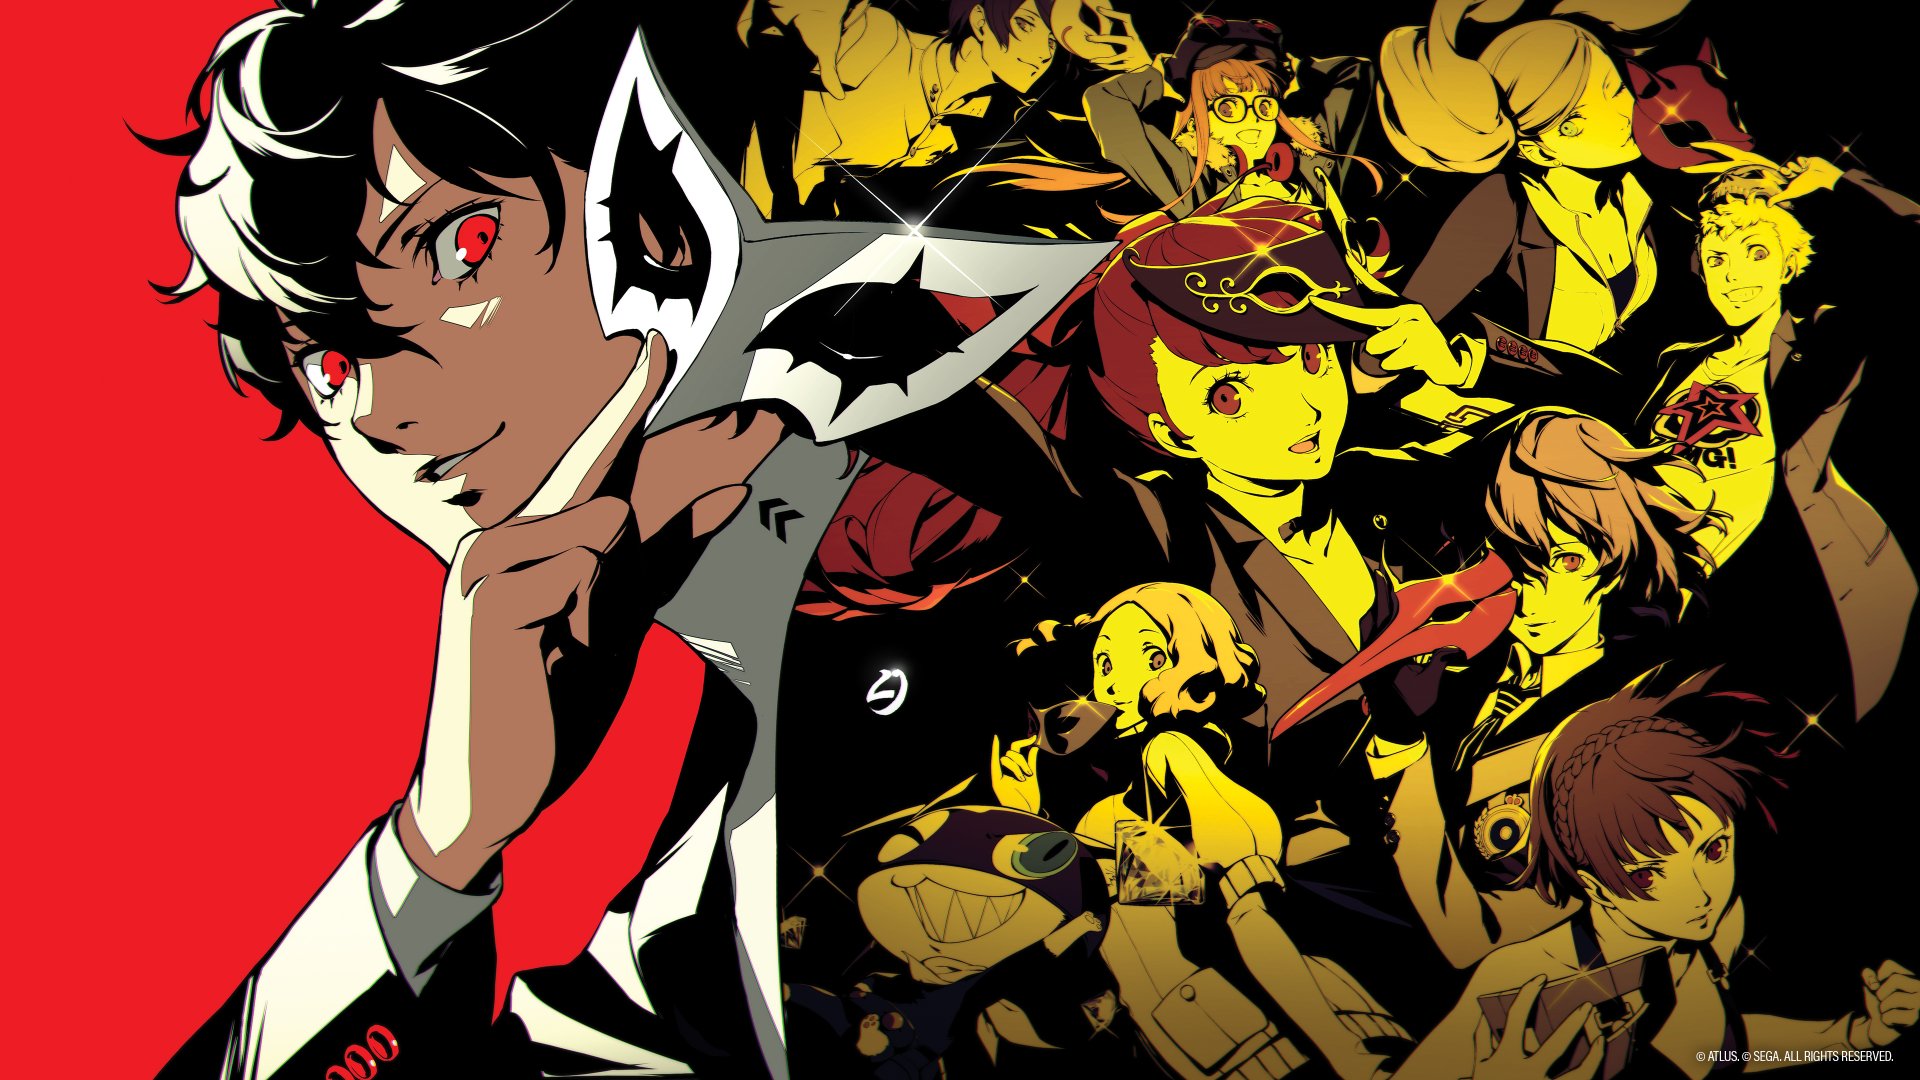 HD desktop wallpaper featuring Joker from Persona 5, styled in bold red and black with dynamic illustrations of other characters in the background.